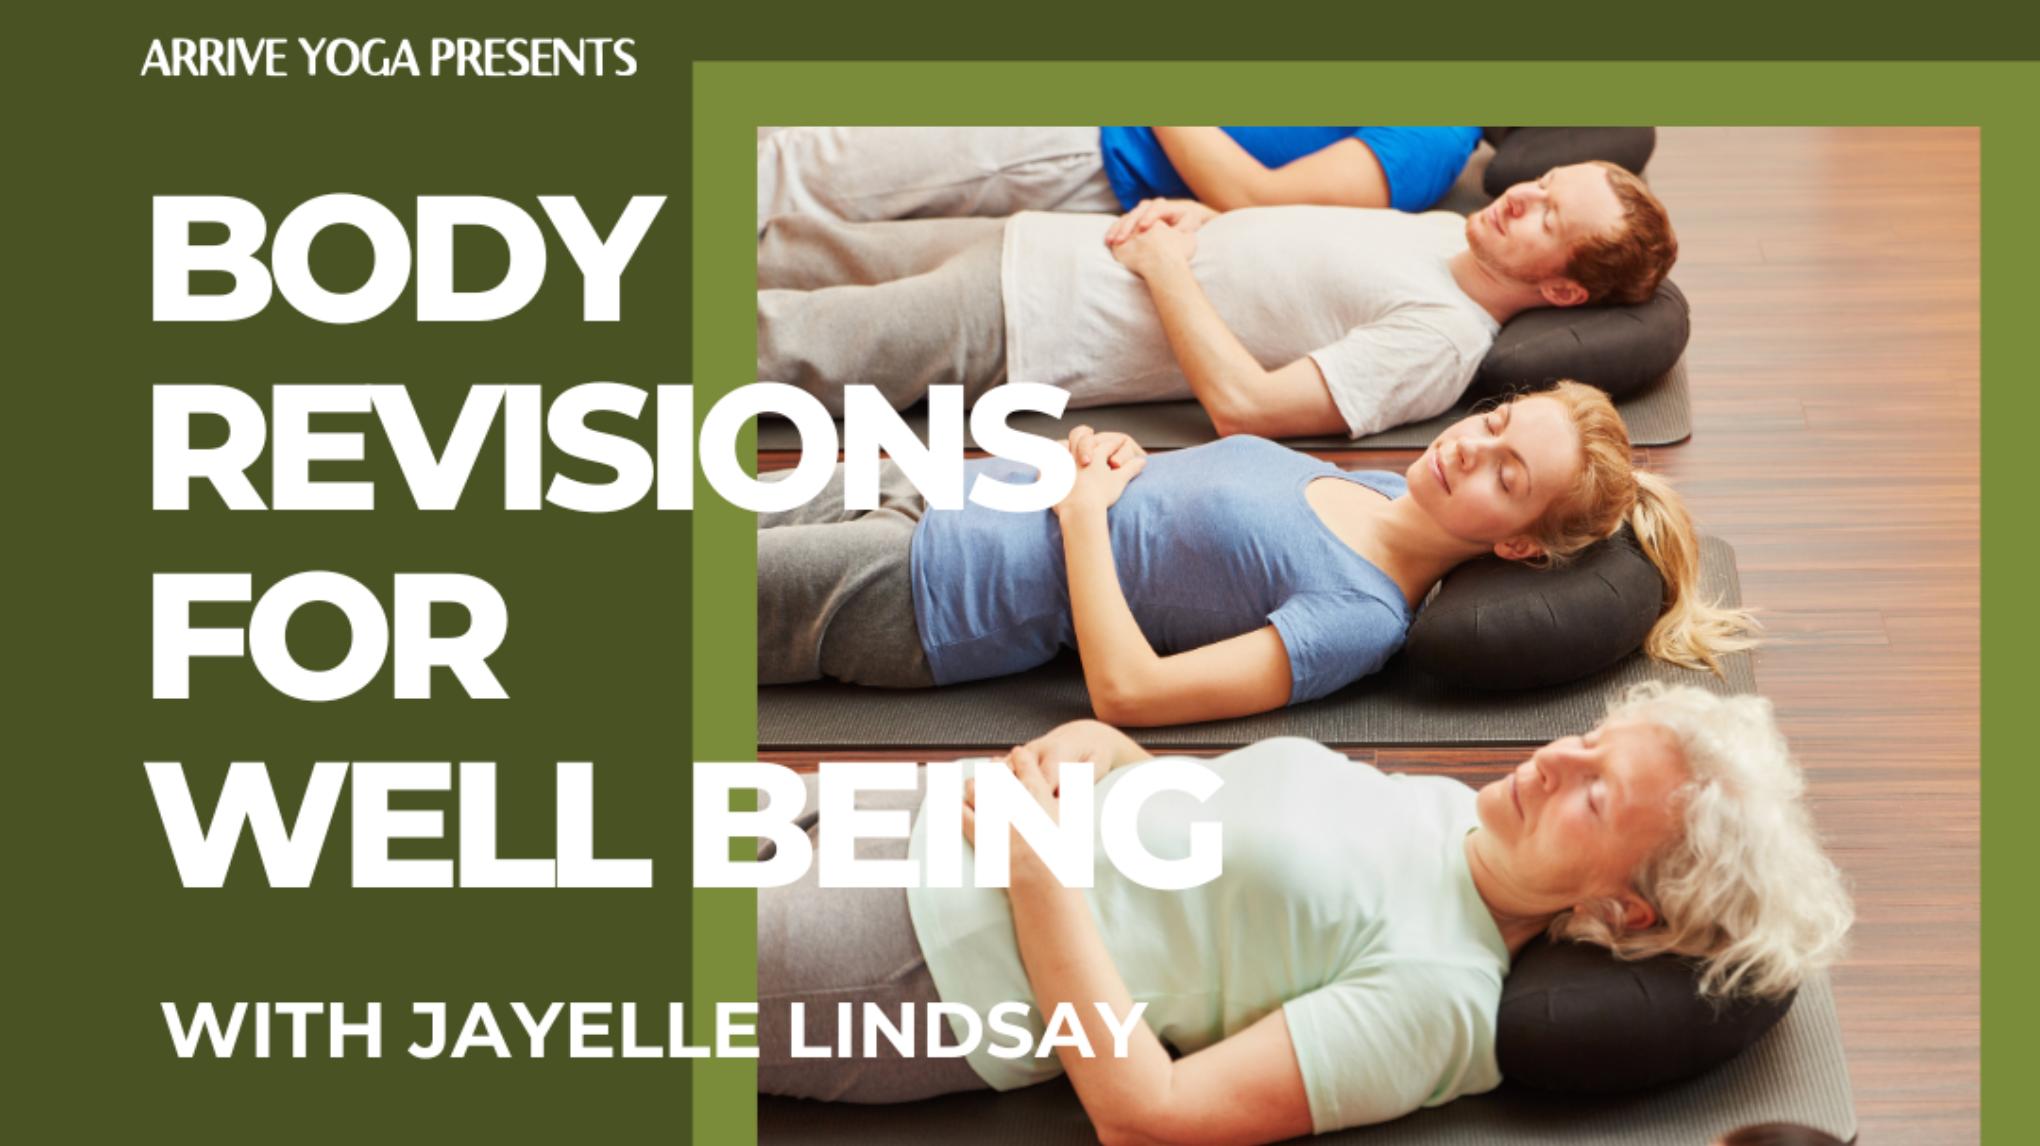 BODY REVISIONS FOR WELL BEING